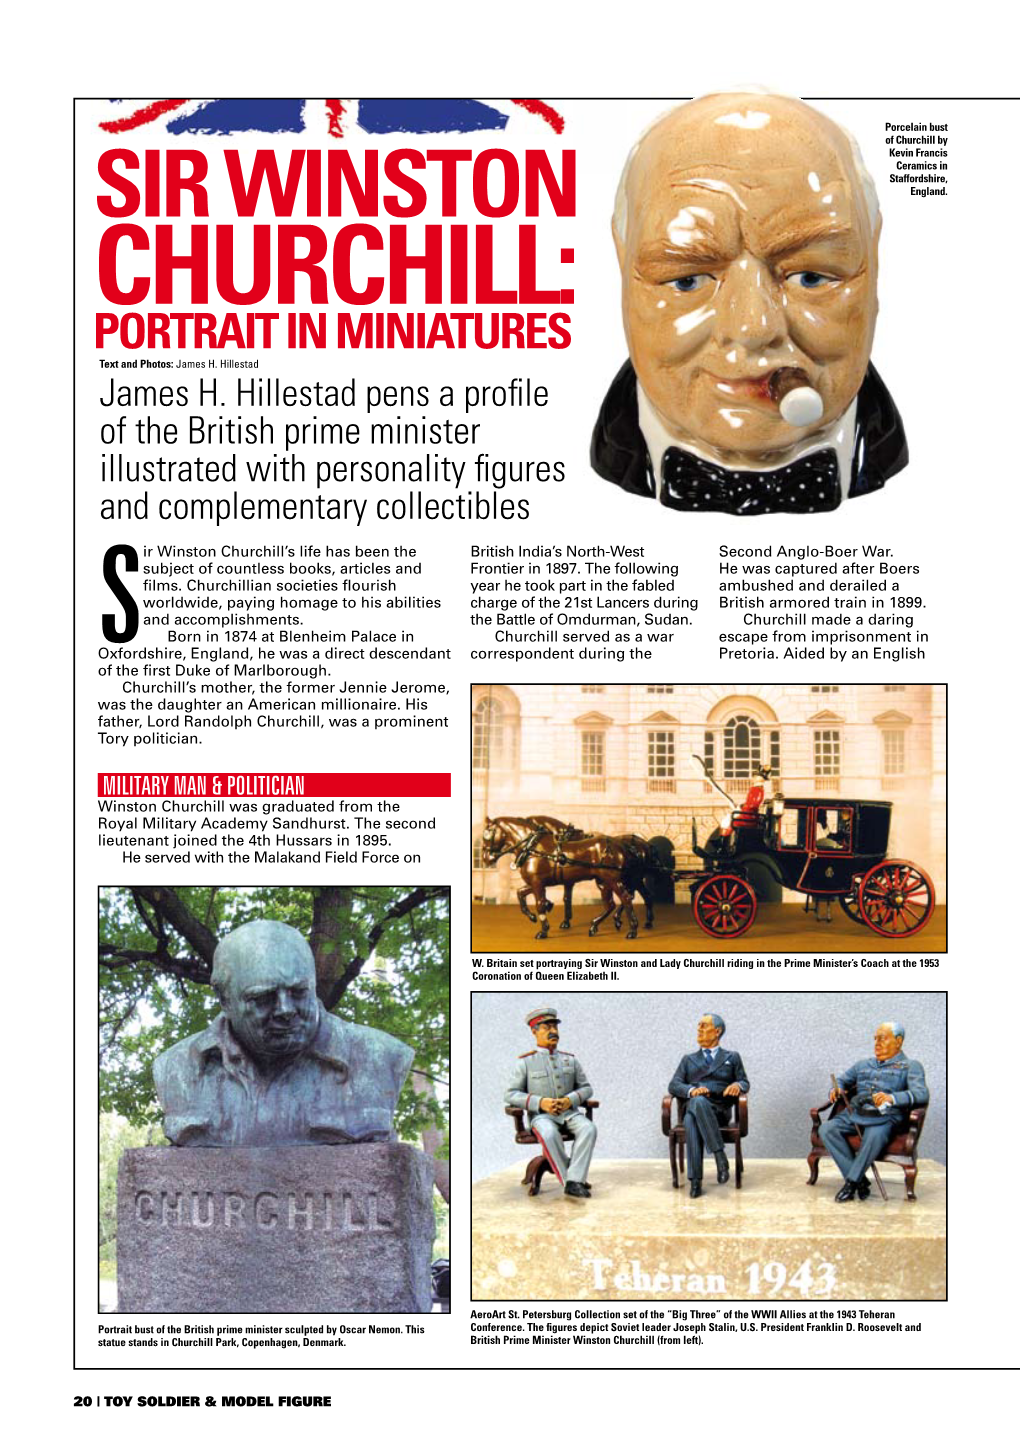 CHURCHILL: PORTRAIT in MINIATURES Text and Photos: James H